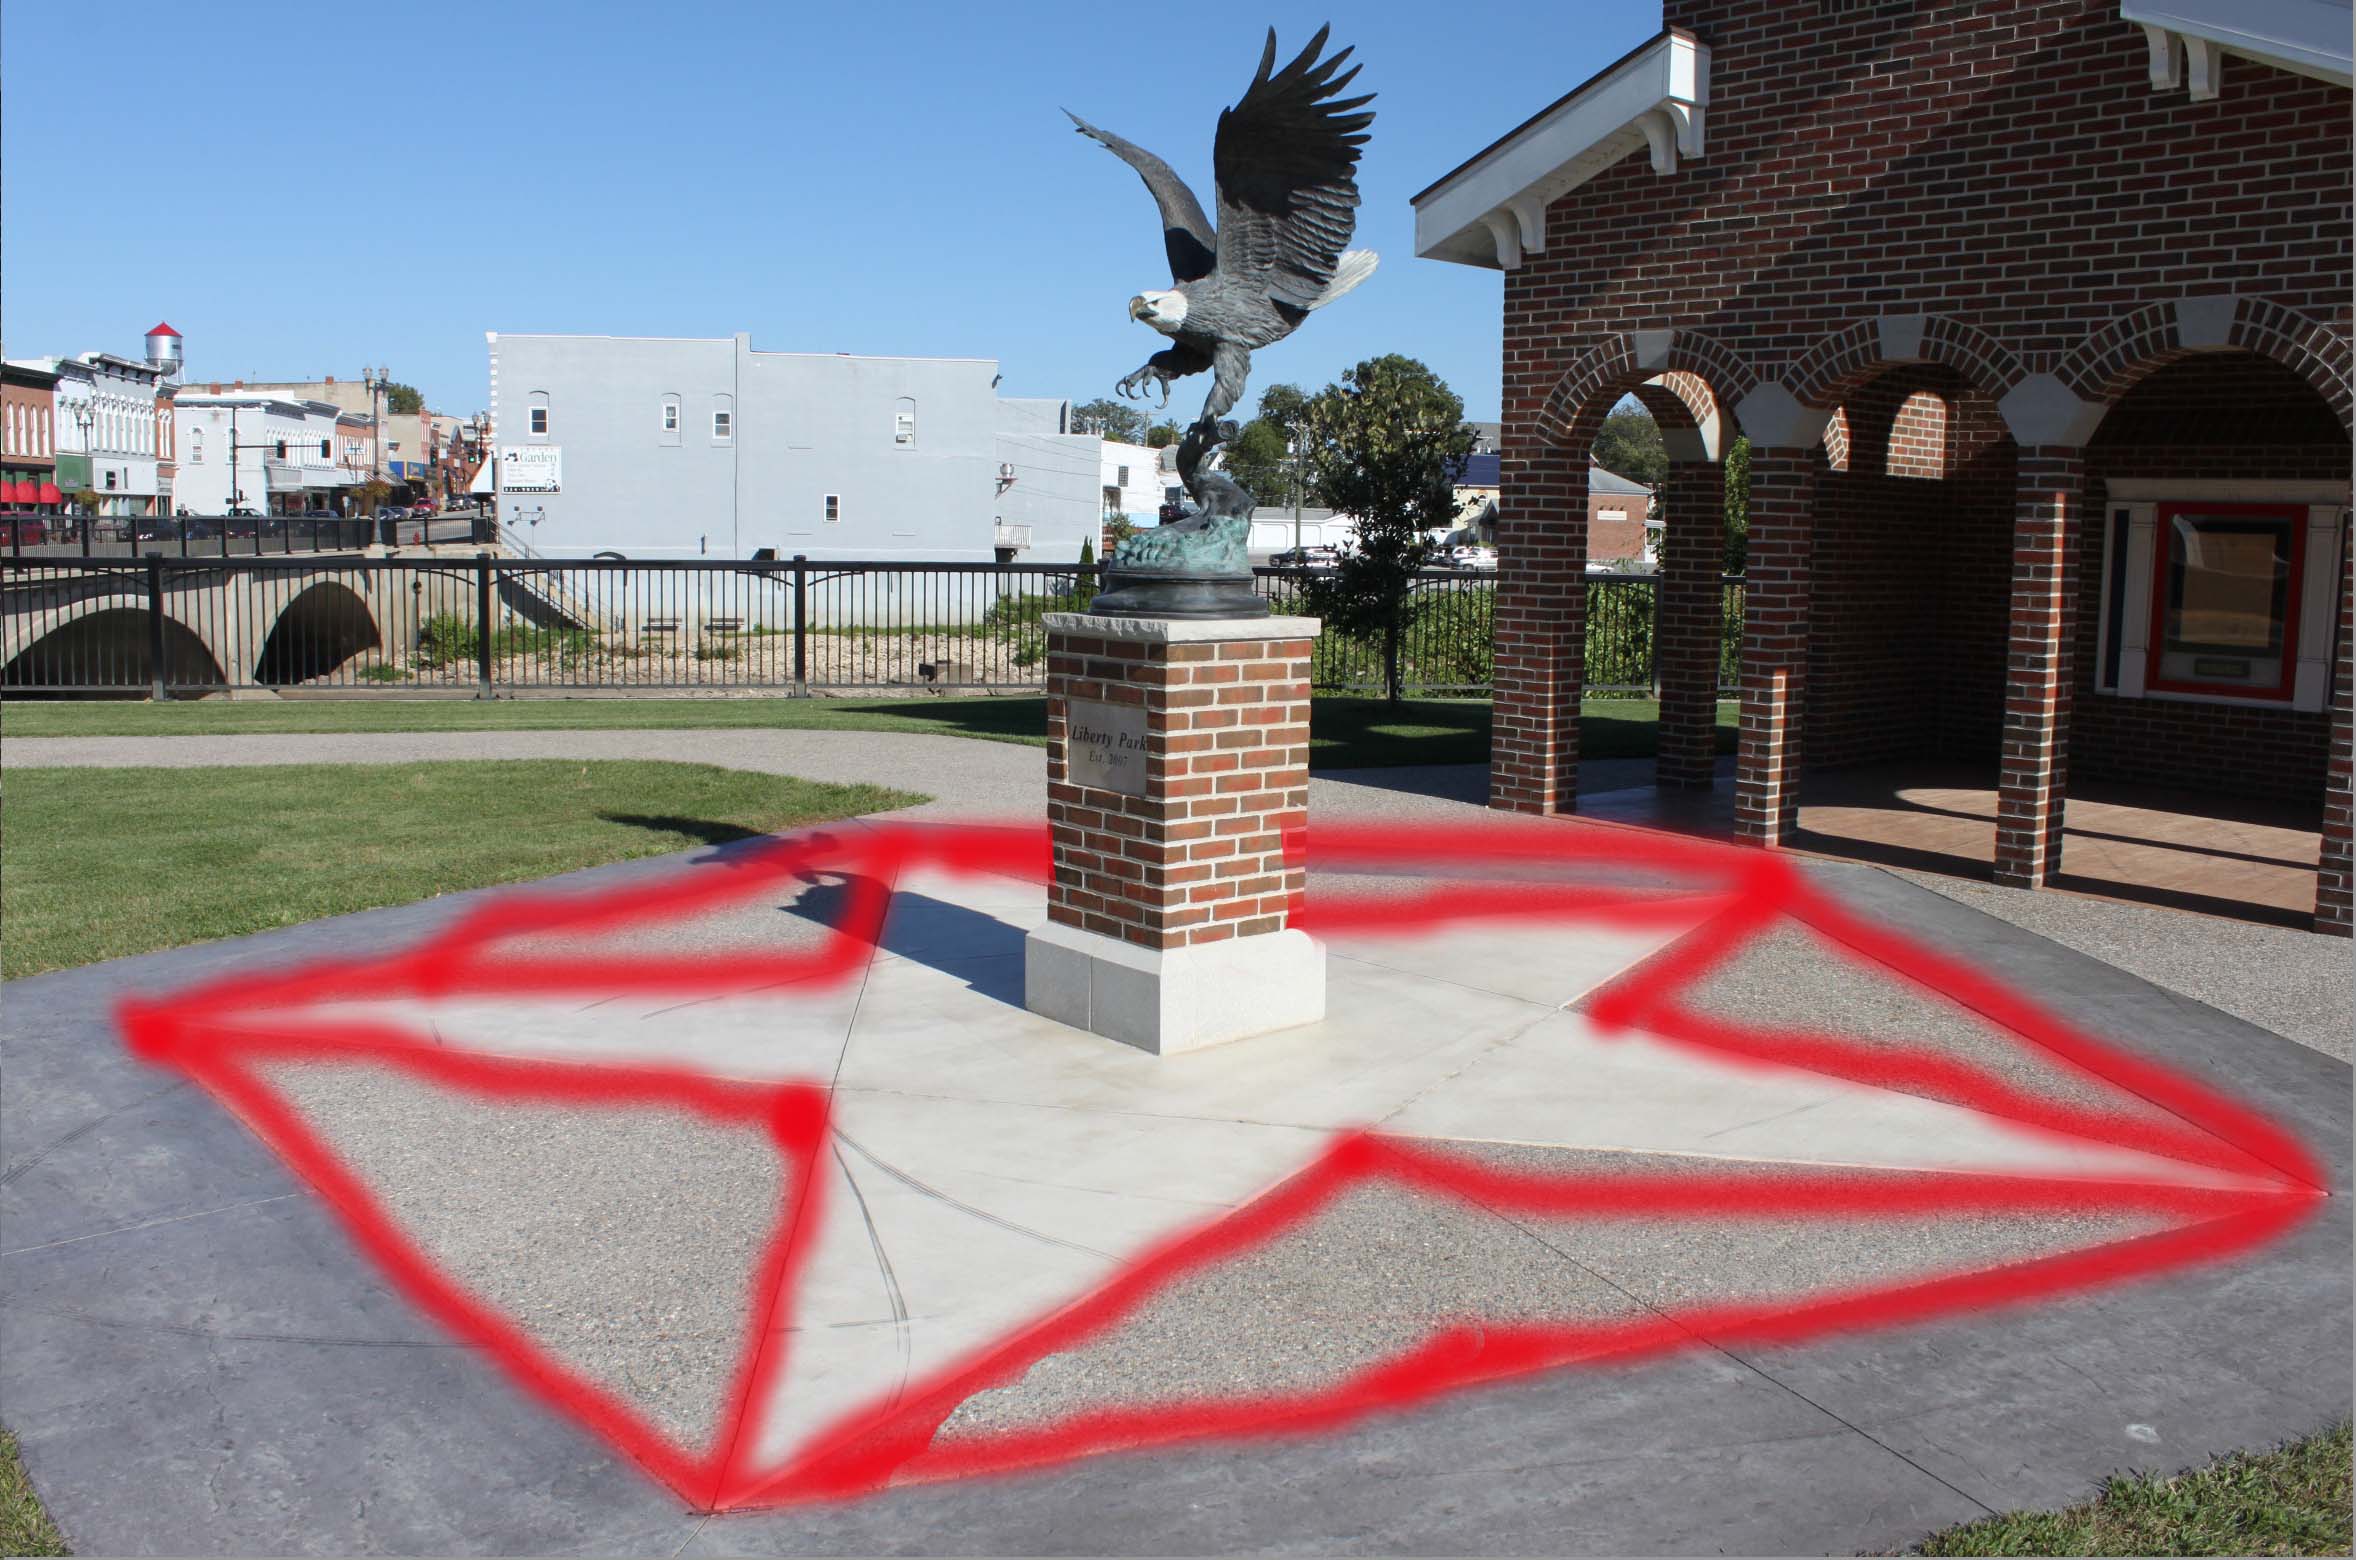  If you look around the edges of the statue, you will see a pentagram that I highlighted very clearly. Make no mistake, its there. My previous gallery showed a swastika in the old Independence, IA townhall. Now this. What other wonderful satanic and evil insignias dot this town? Stay tuned.